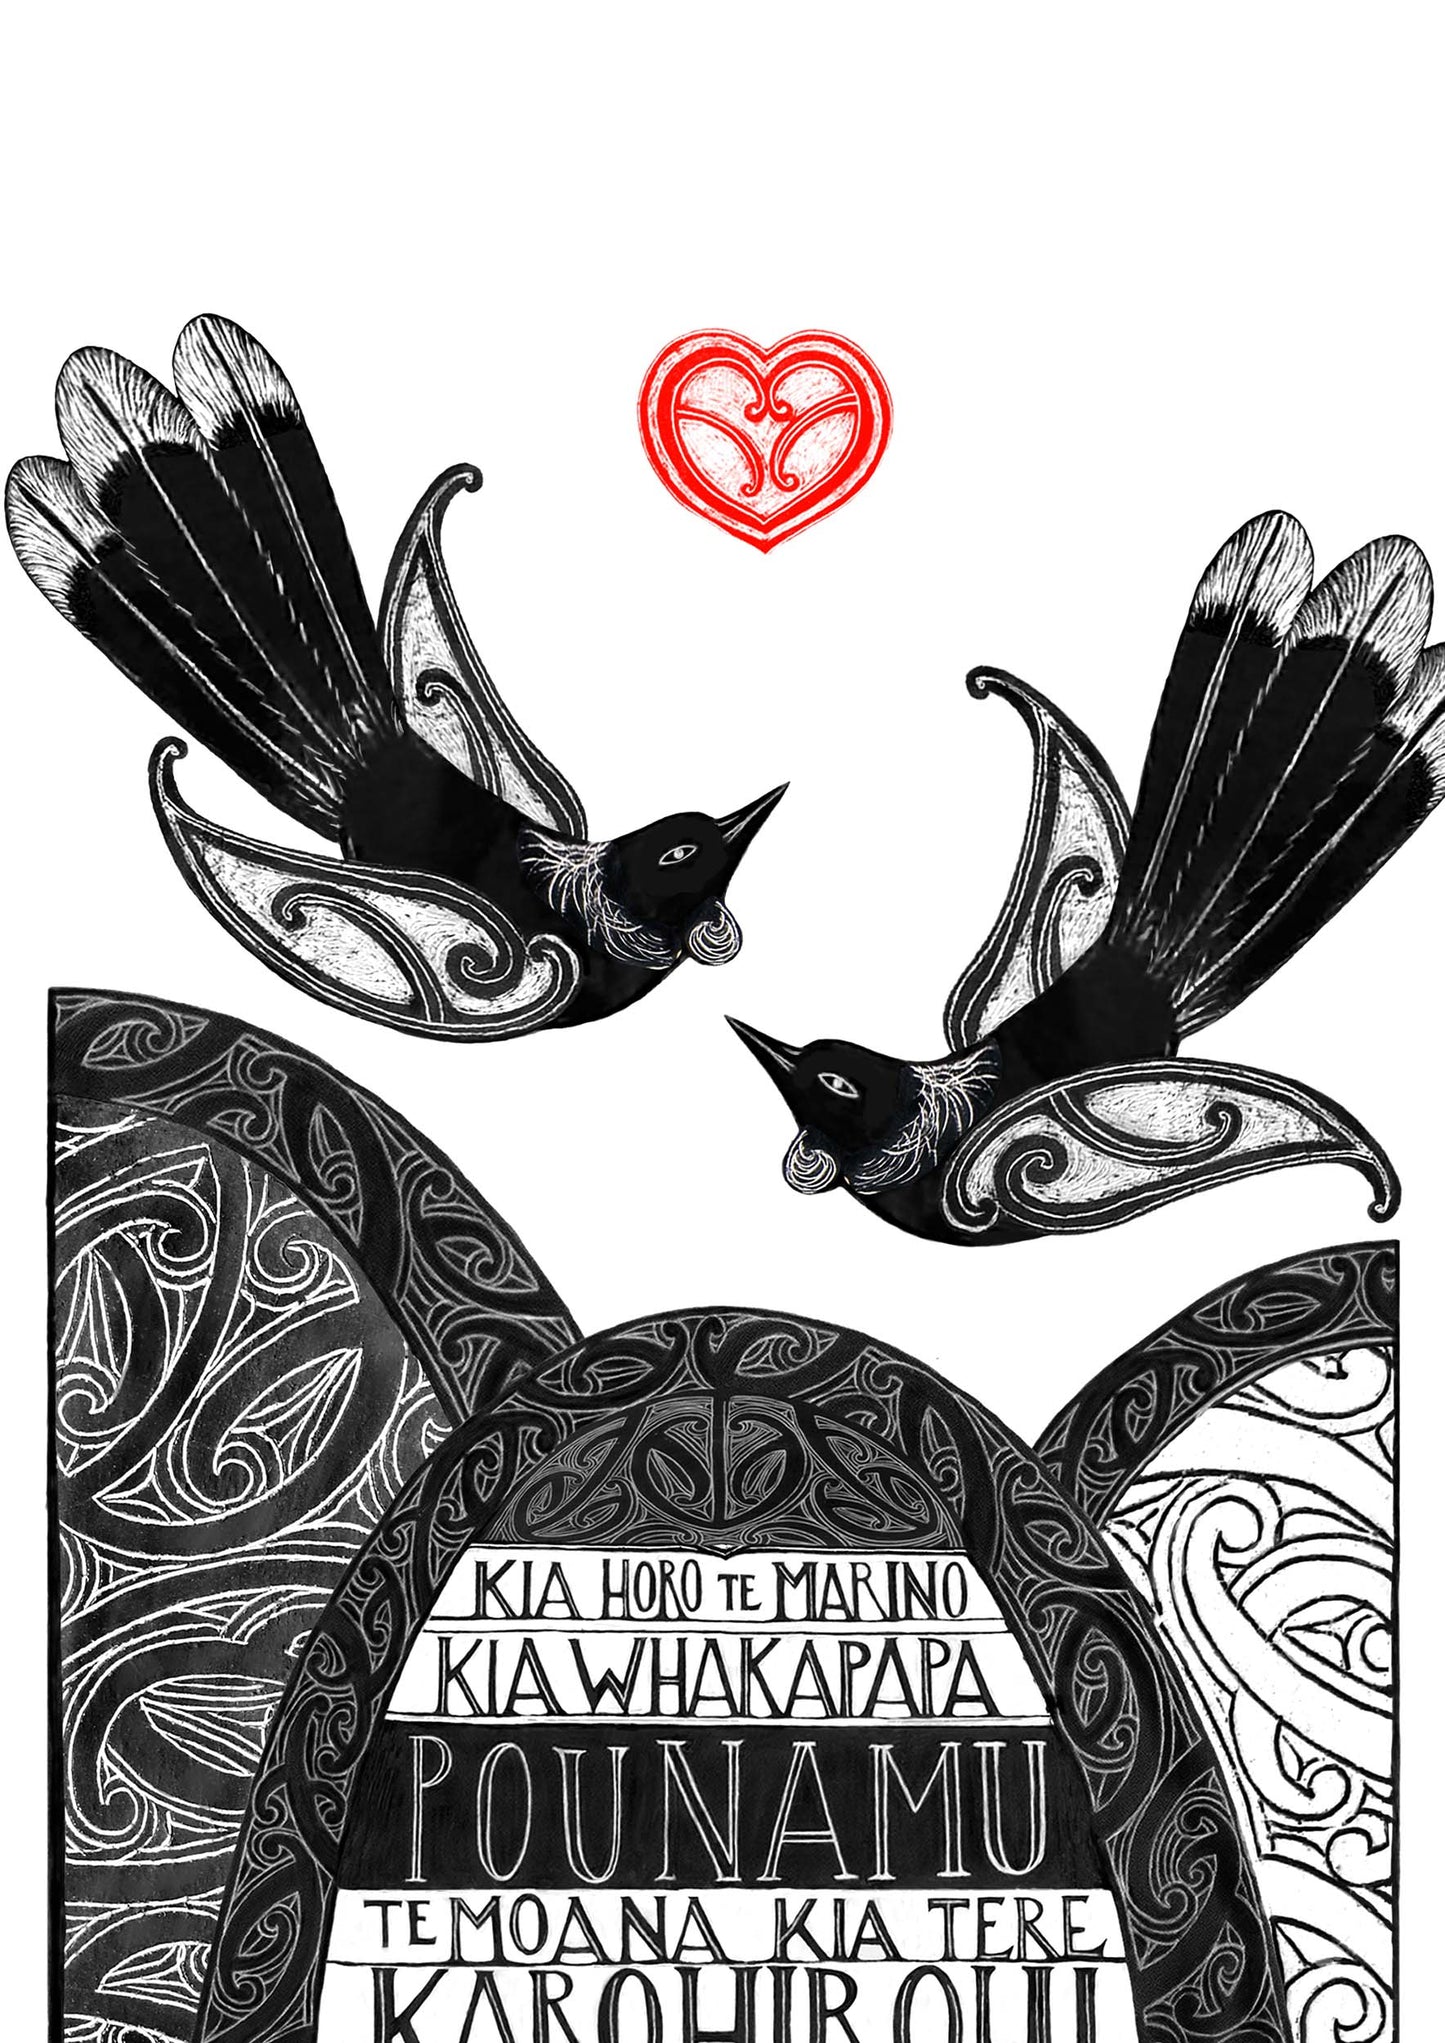 close up of the tui birds in Kia horo te marino blessing art print with maori art and words in te reo maori and english by Nz artist Amber Smith